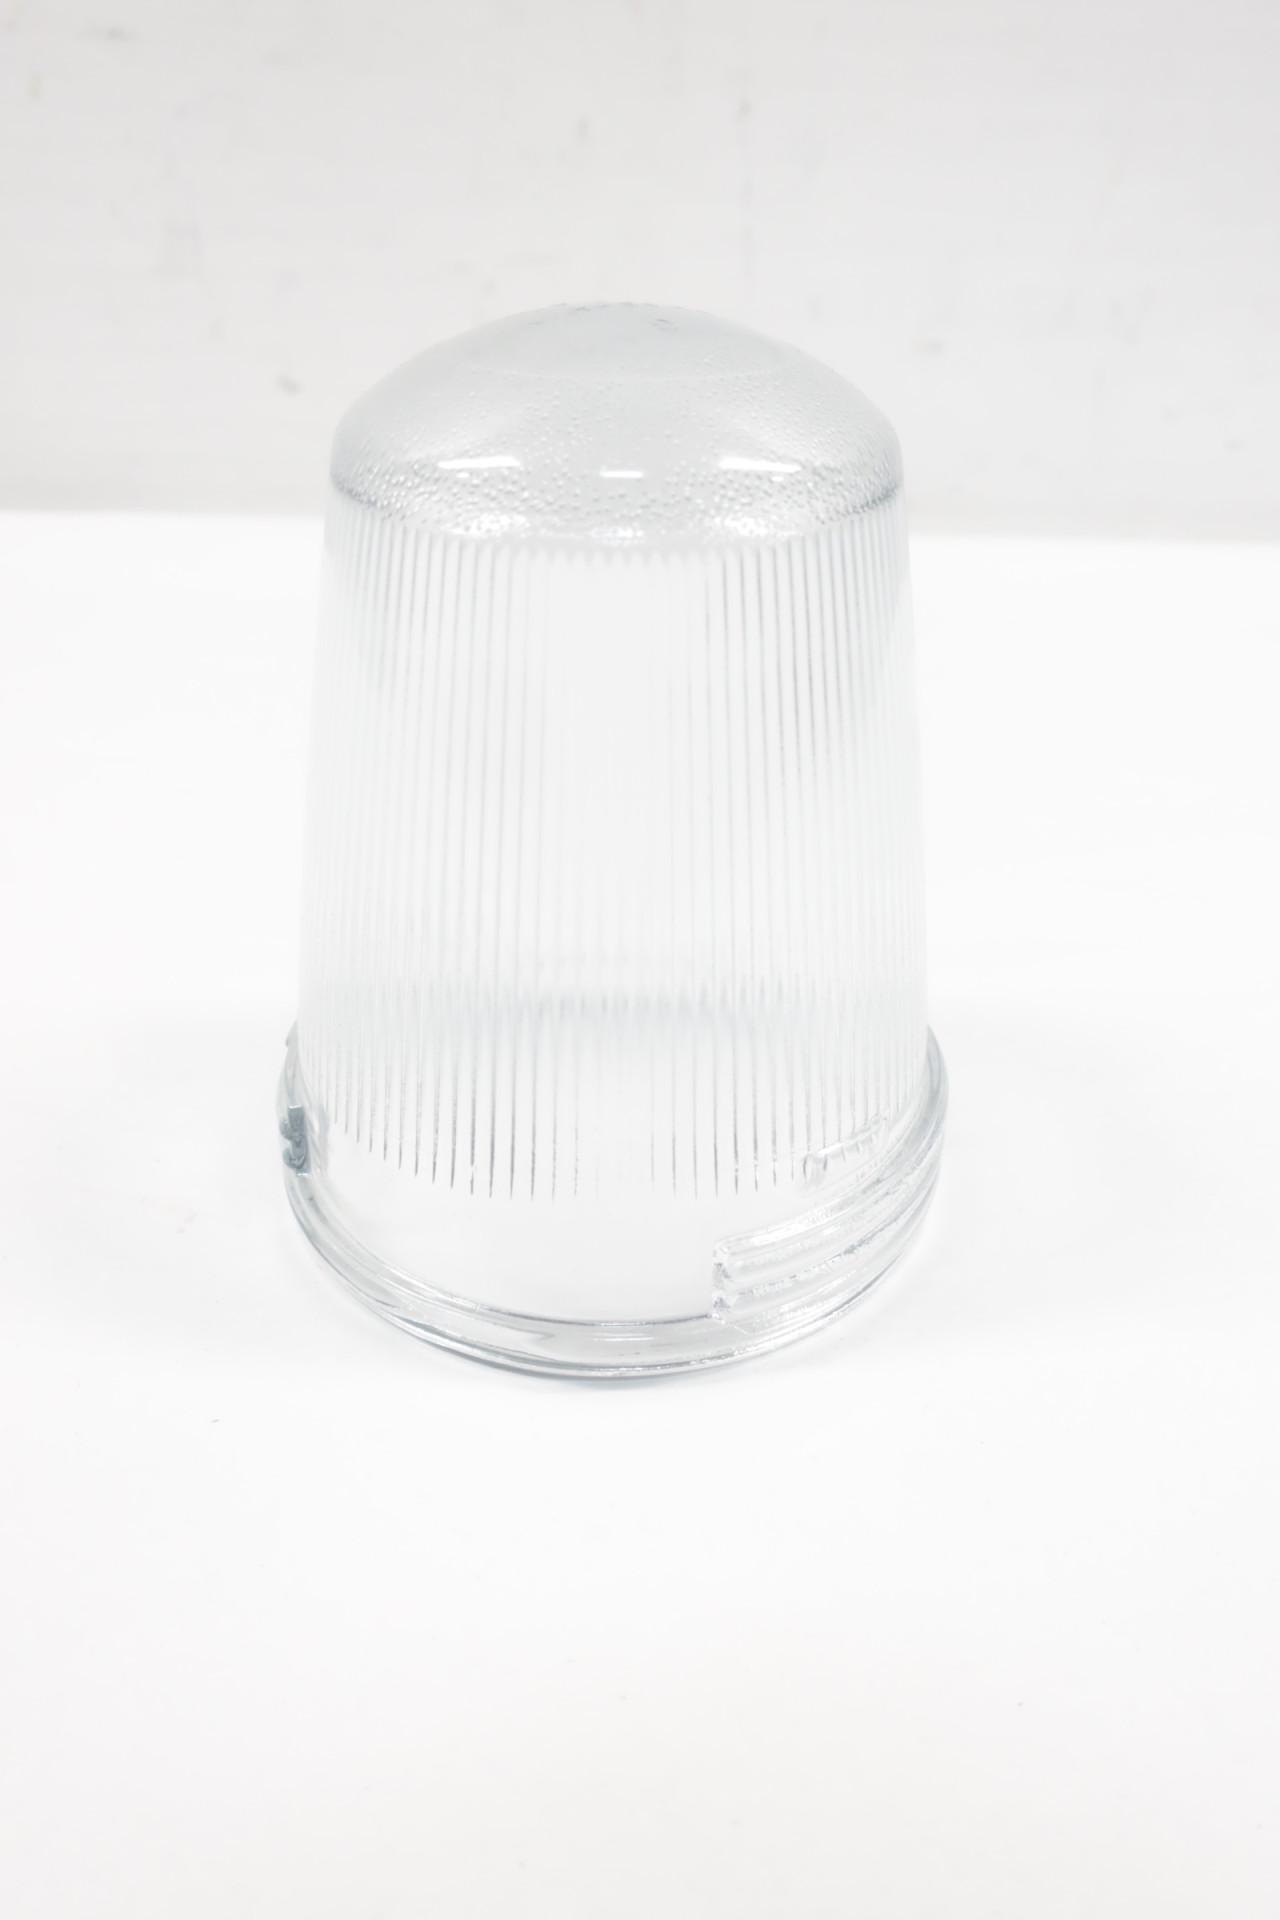 NEW CROUSE HINDS G54 CLEAR GLASS GLOBE LISTED 426B 